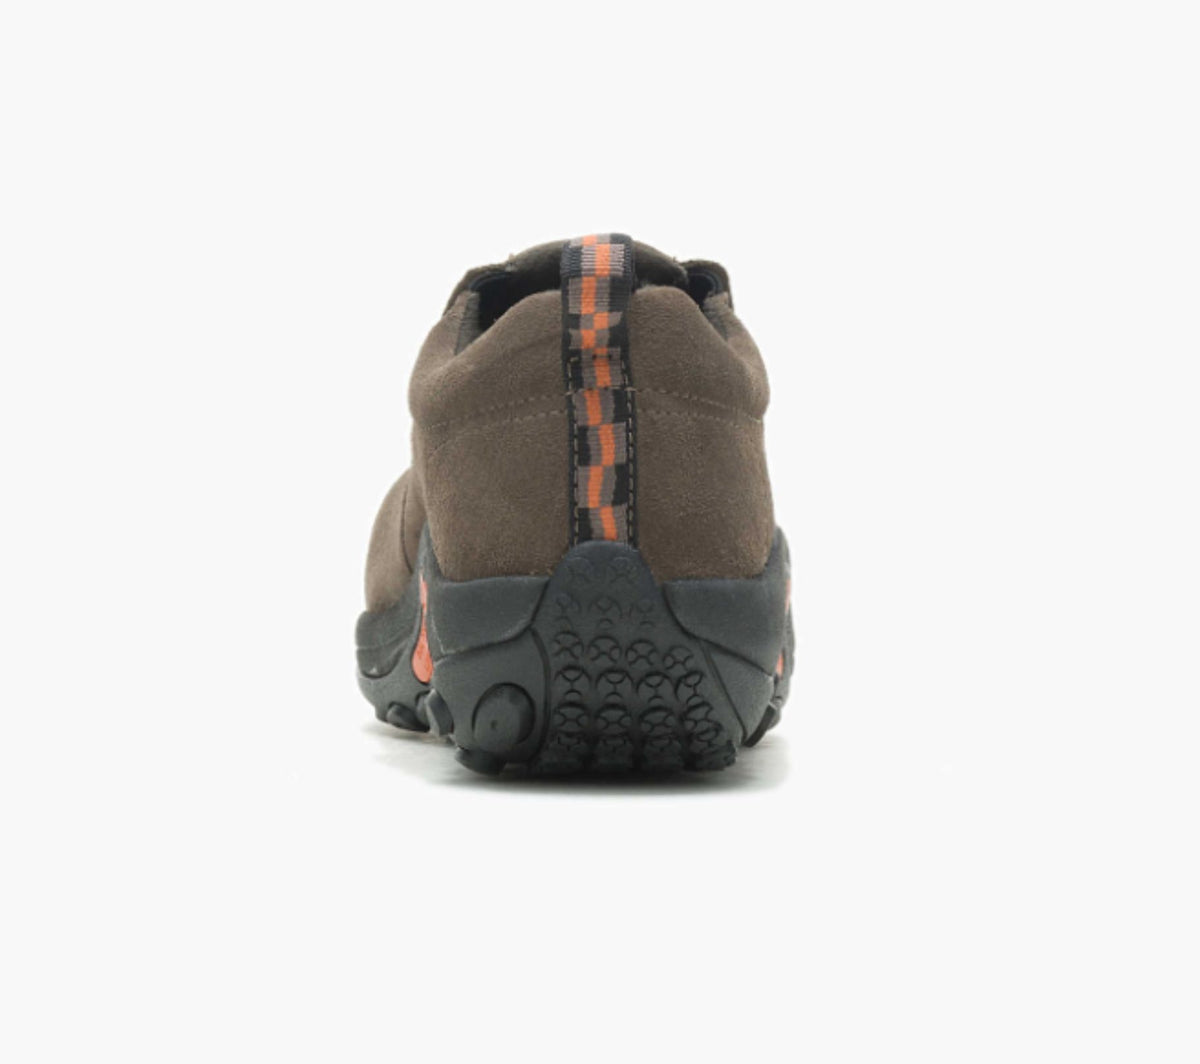 Merrell Work Jungle Moc EH AT Suede Slip-On Shoe - Work World - Workwear, Work Boots, Safety Gear